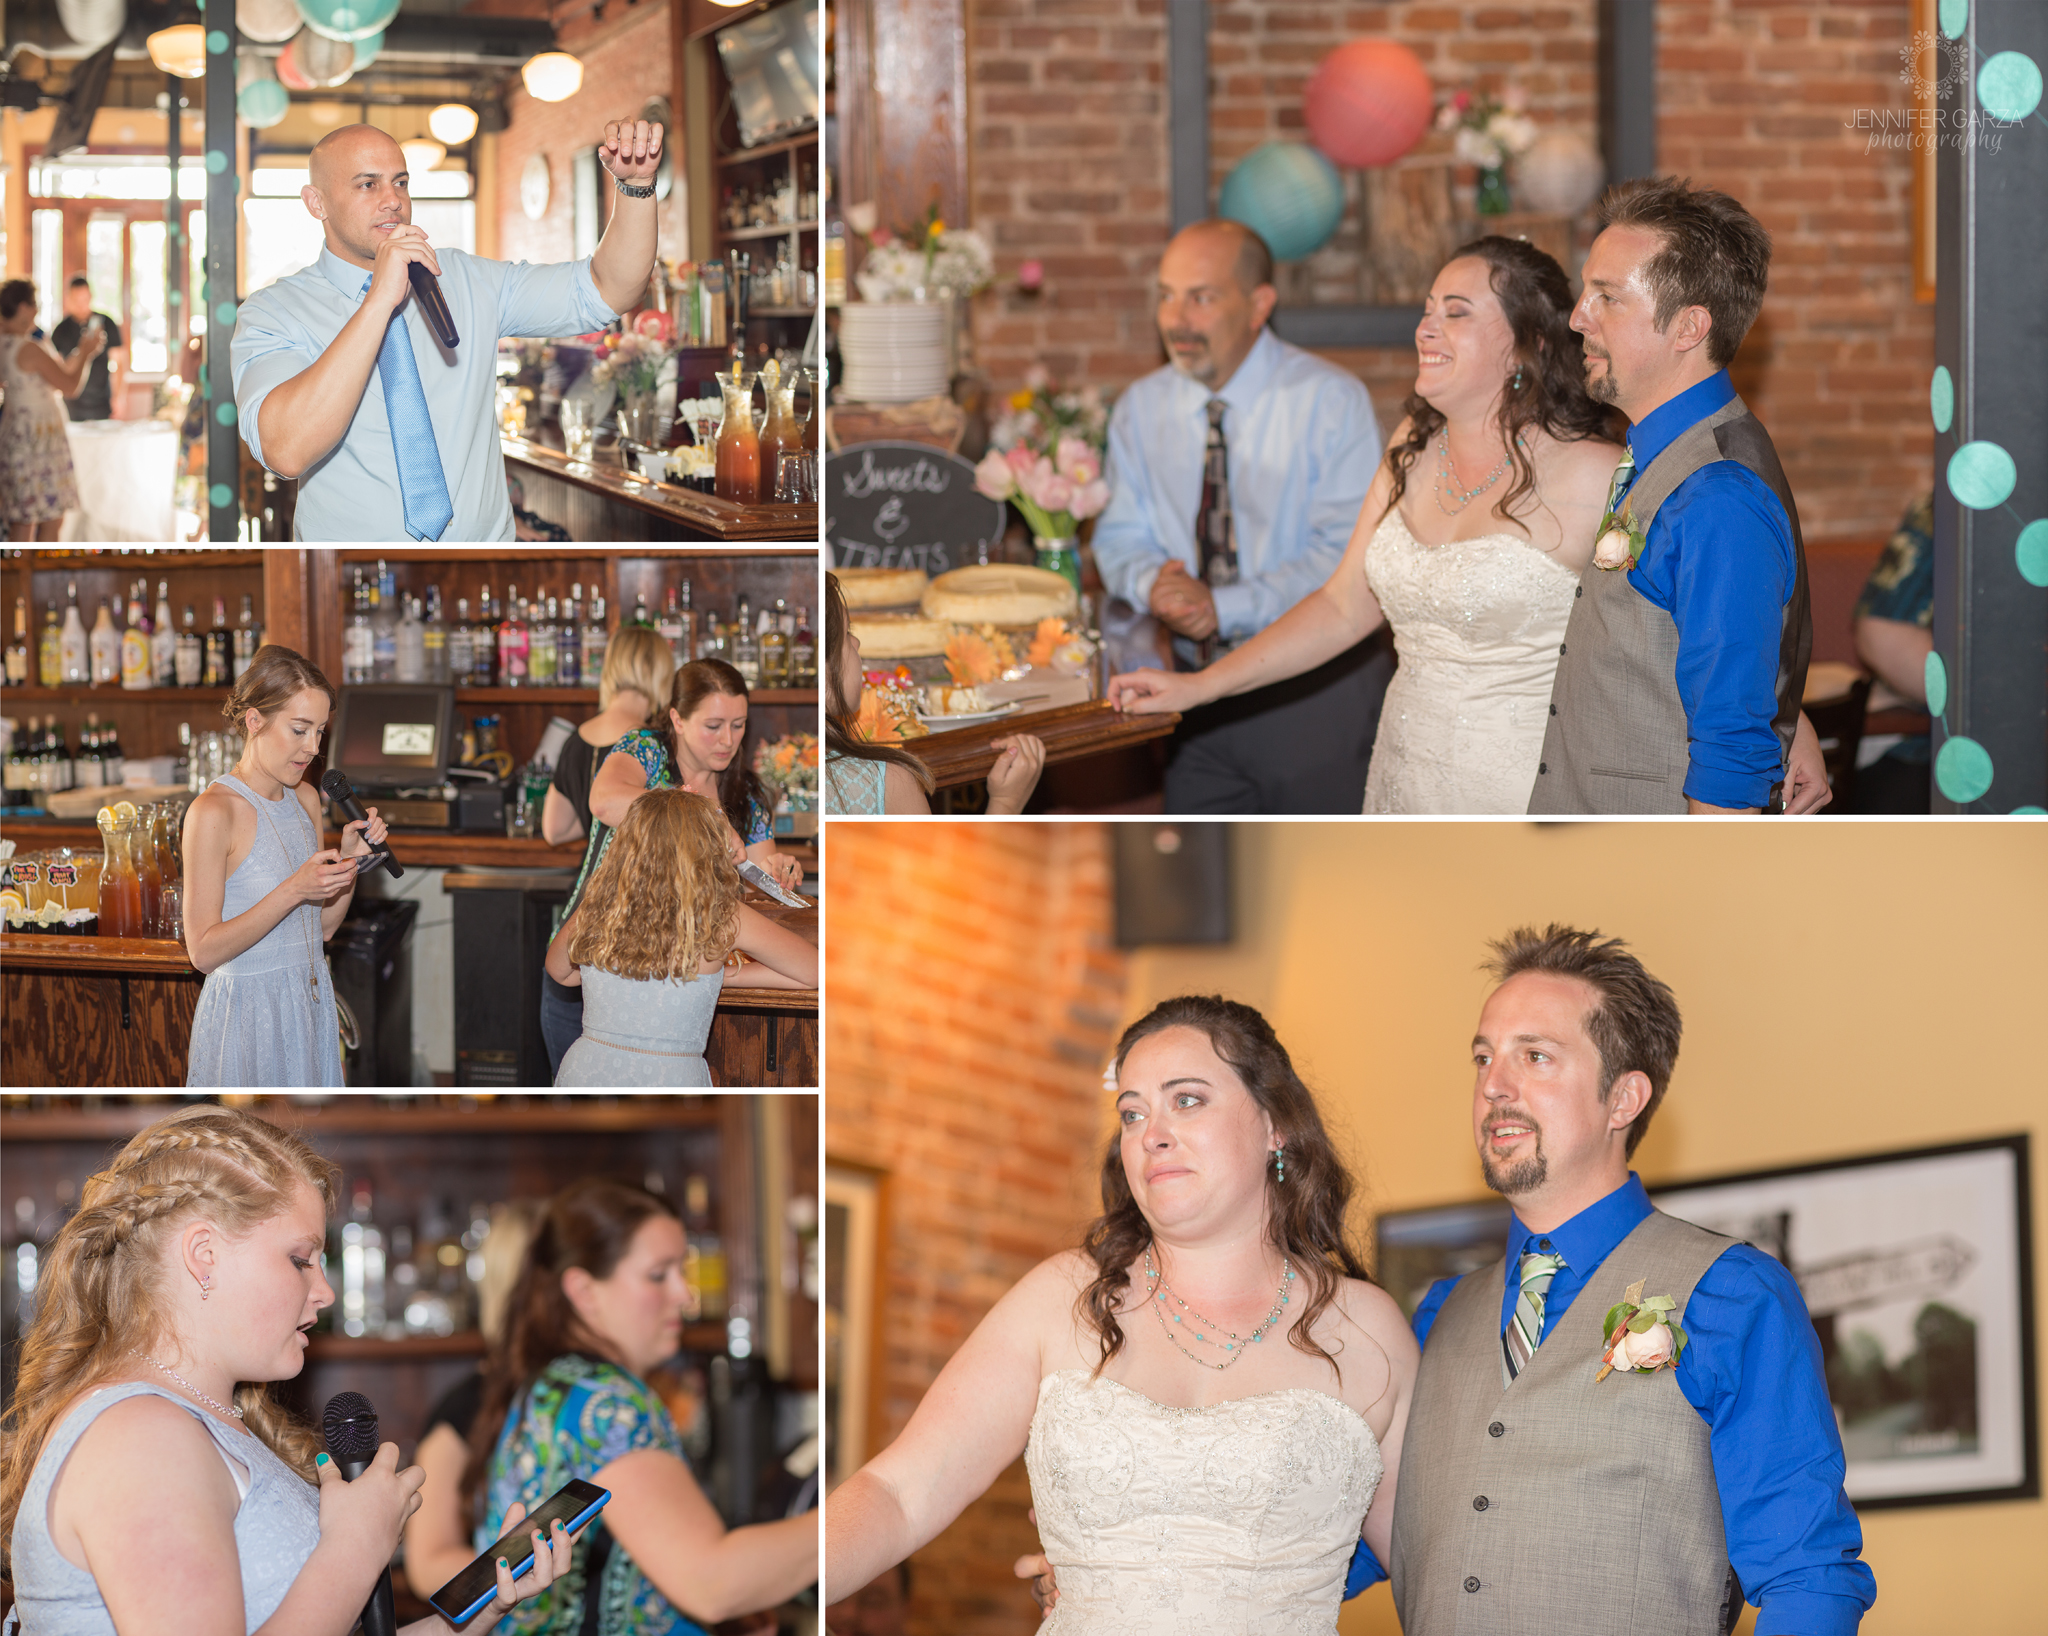 Best Man and Maid of Honor speeches during a summer wedding at a pub. Rachael & Wes' Wash Park and Irish Rover Pub Denver Wedding by Colorado Wedding Photographer, Jennifer Garza. Colorado Wedding Photographer, Denver Wedding Photographer, Colorado Wedding Photos, Denver Wedding Photos, Colorado Bride, Denver Bride, Wash Park Wedding, Wash Park, Irish Rover Pub, Irish Rover Pub Wedding, Pub Wedding, Park Wedding